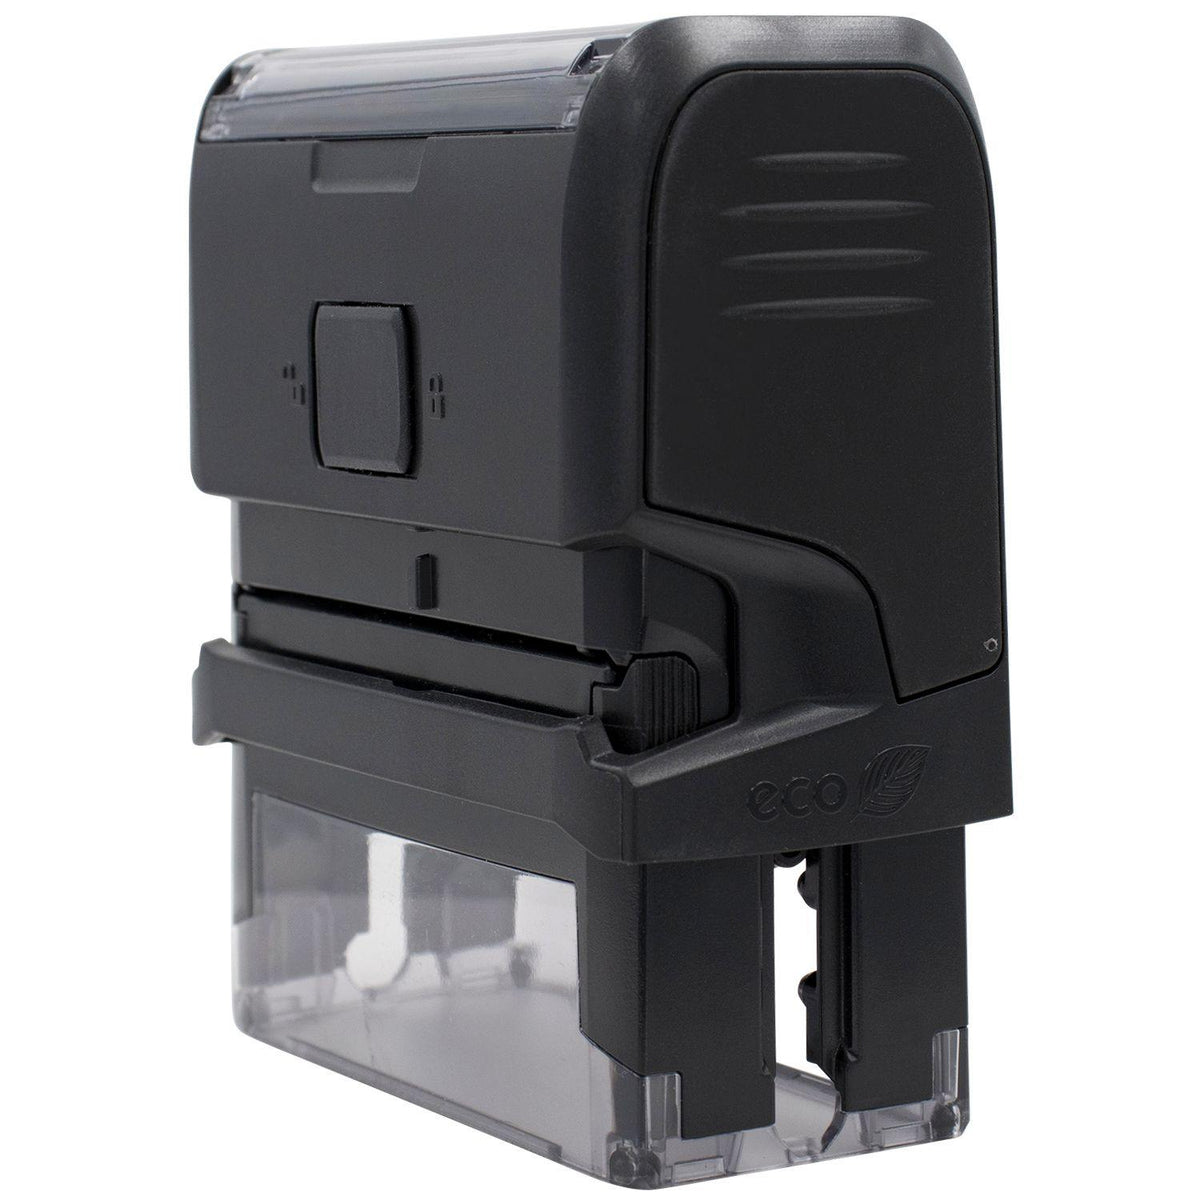 Side View of Large Self Inking Authorizations Revoked Stamp at an Angle